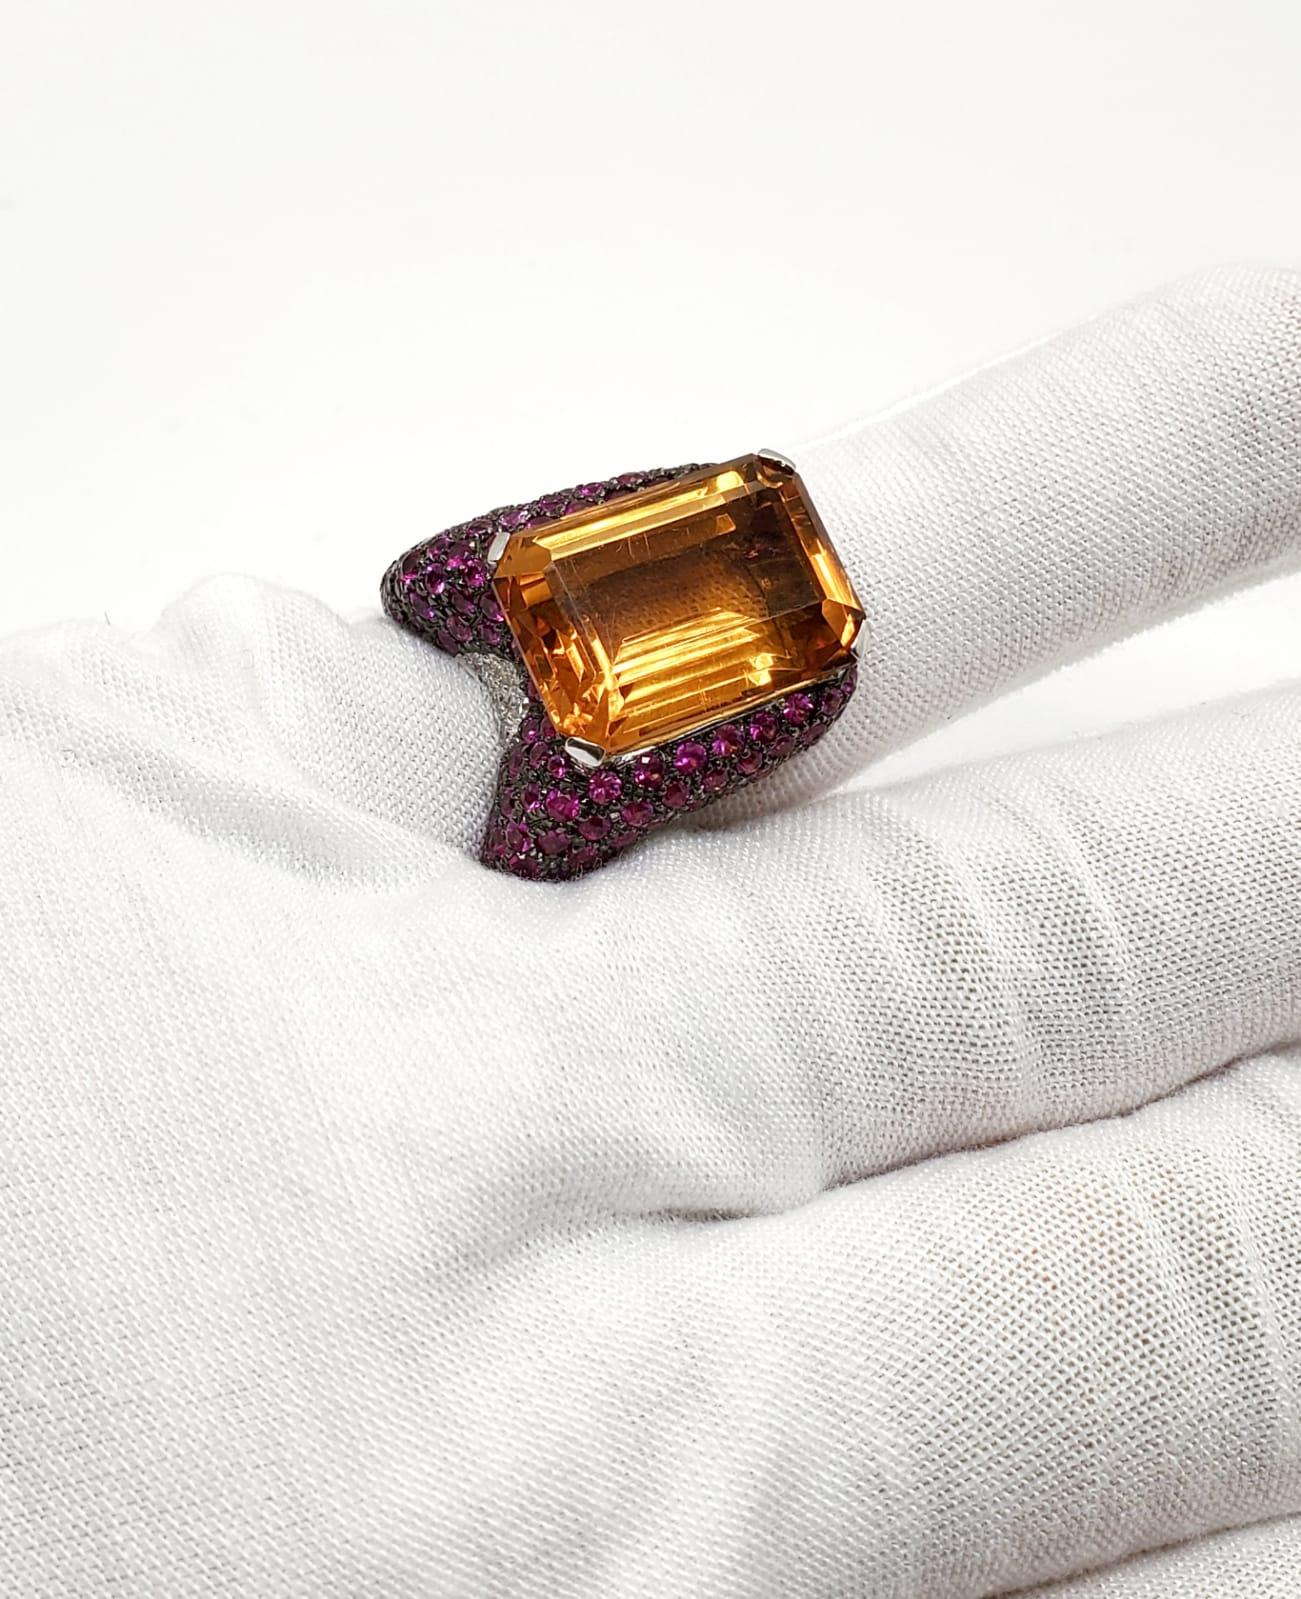 Andreoli Pink Sapphire Diamond Emerald Cut Citrine Cocktail Ring 18 Karat Gold In New Condition For Sale In New York, NY